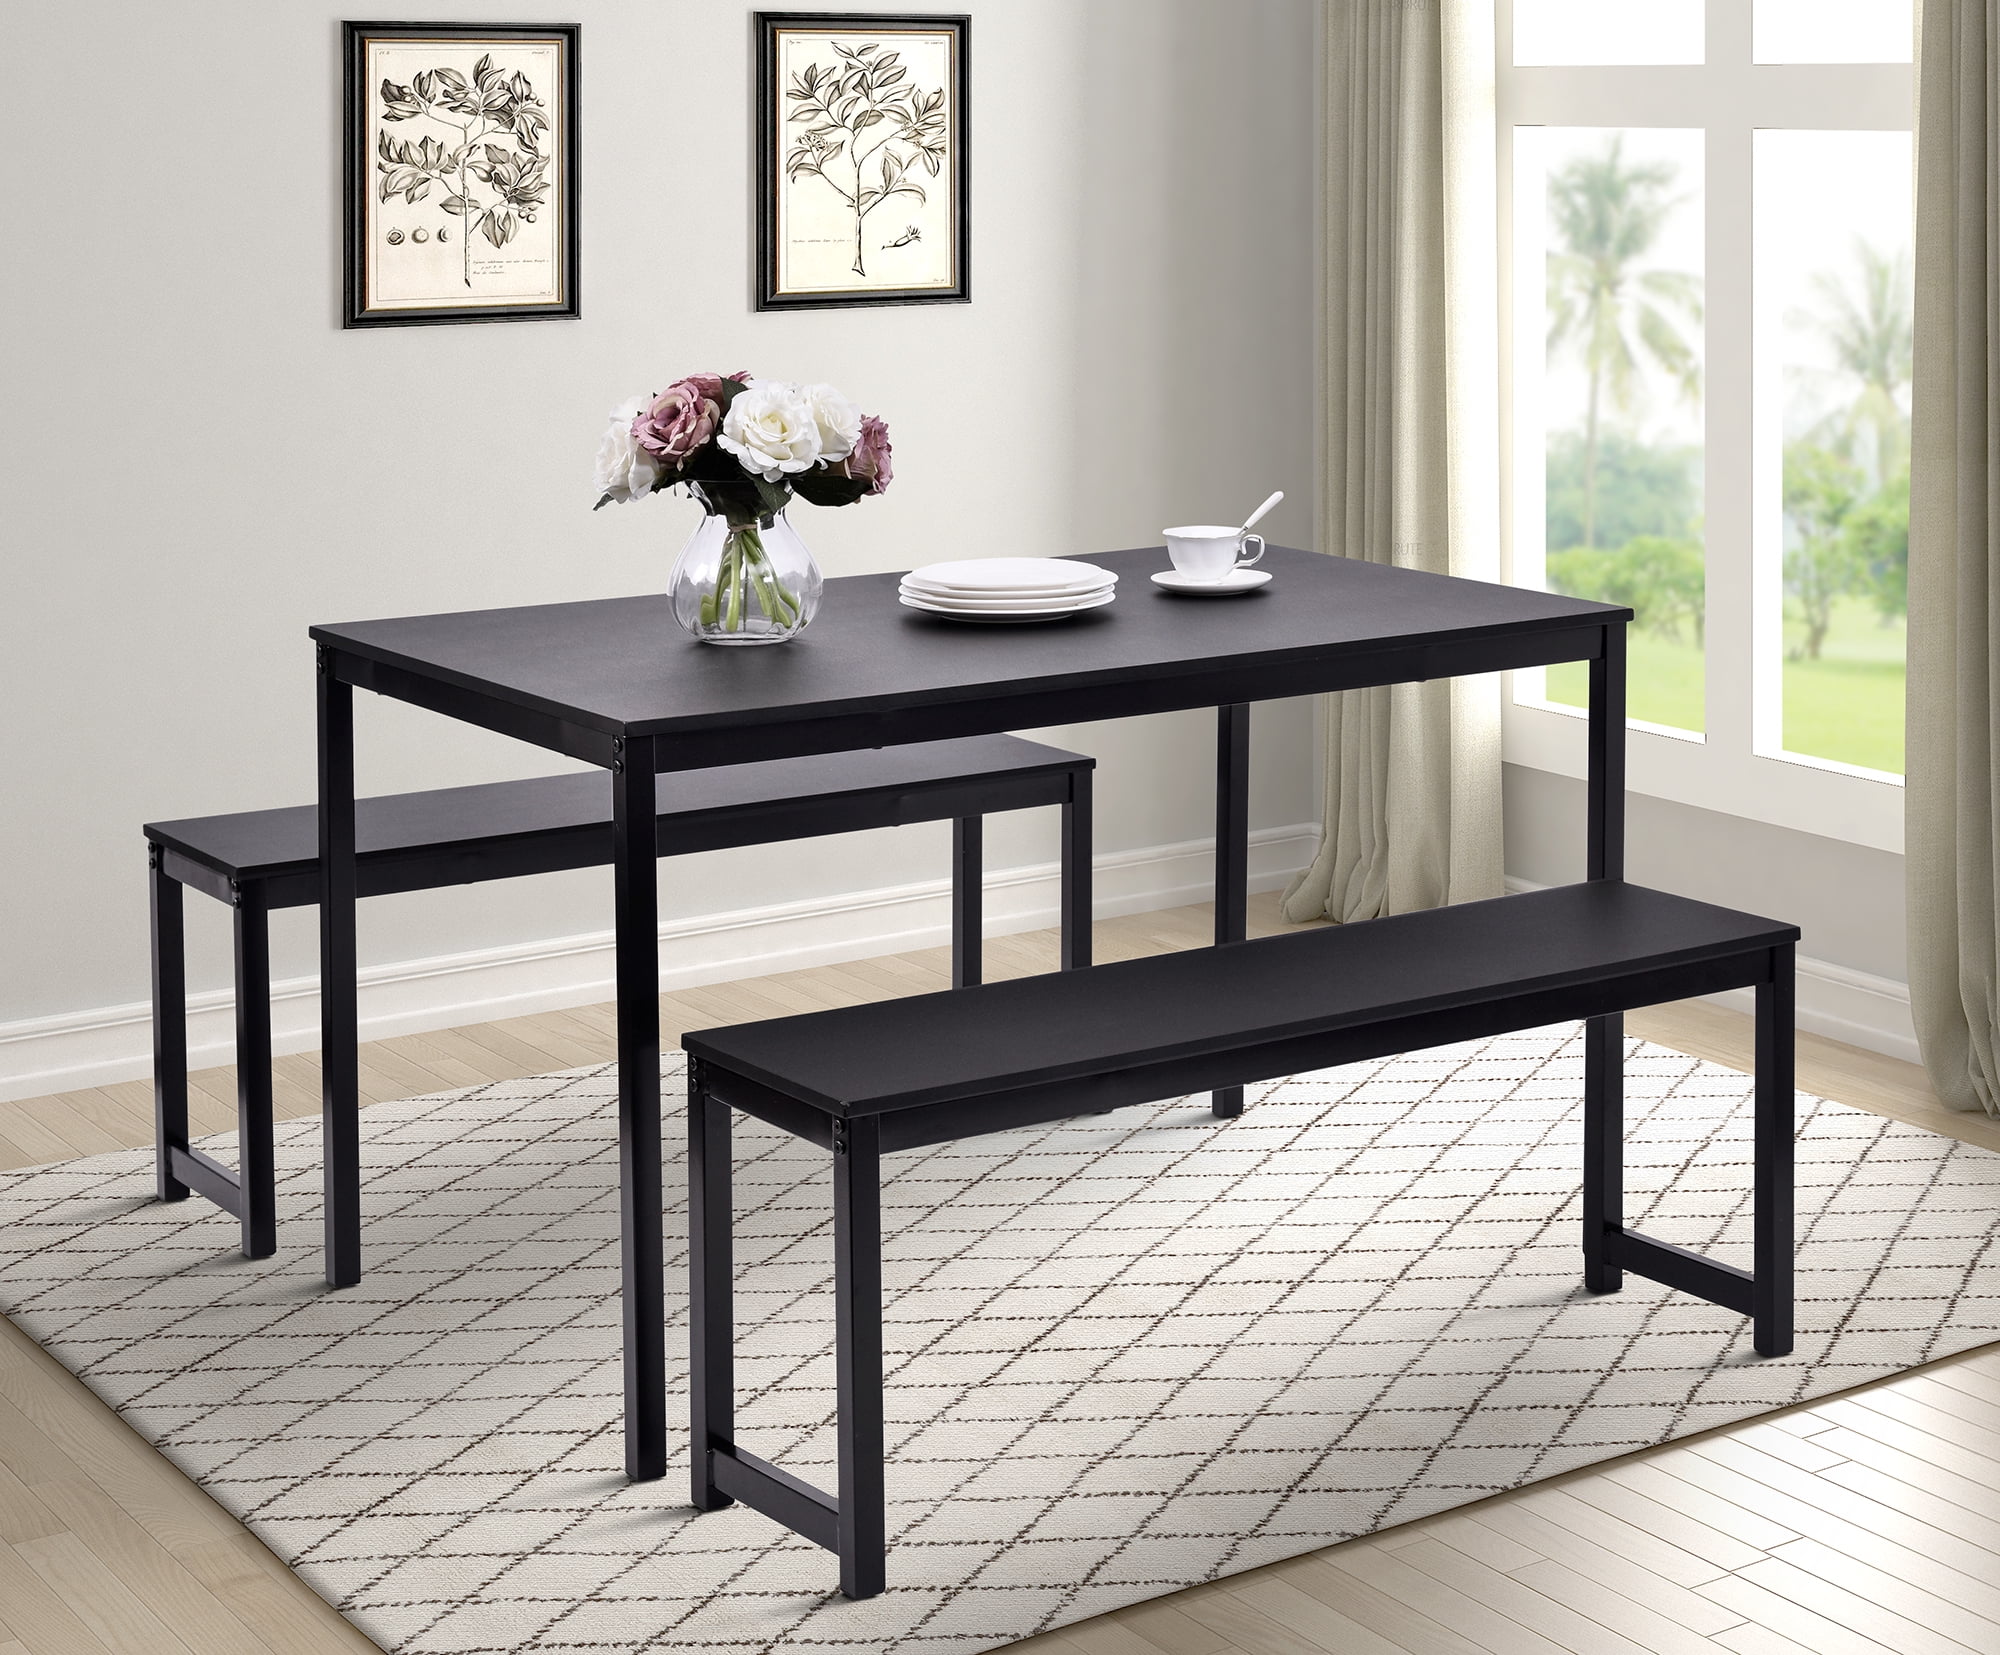 Dining Room Table Bench Set : 26 Big & Small Dining Room Sets with